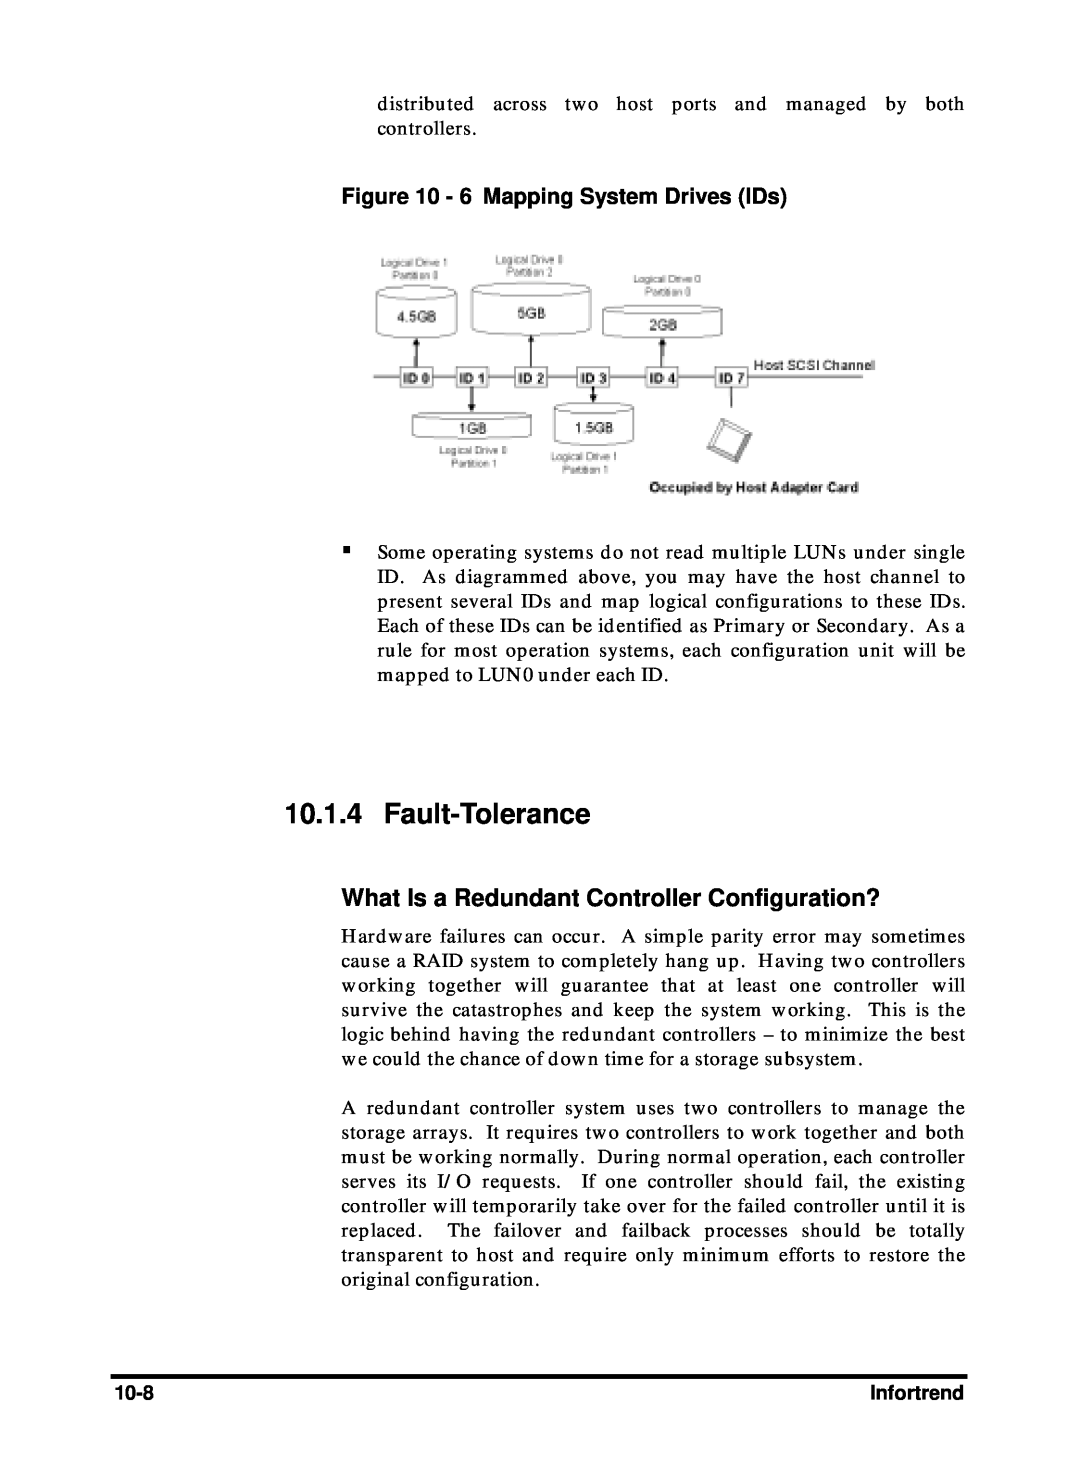 Compaq Infortrend manual Fault-Tolerance, What Is a Redundant Controller Configuration?, 6 Mapping System Drives IDs 